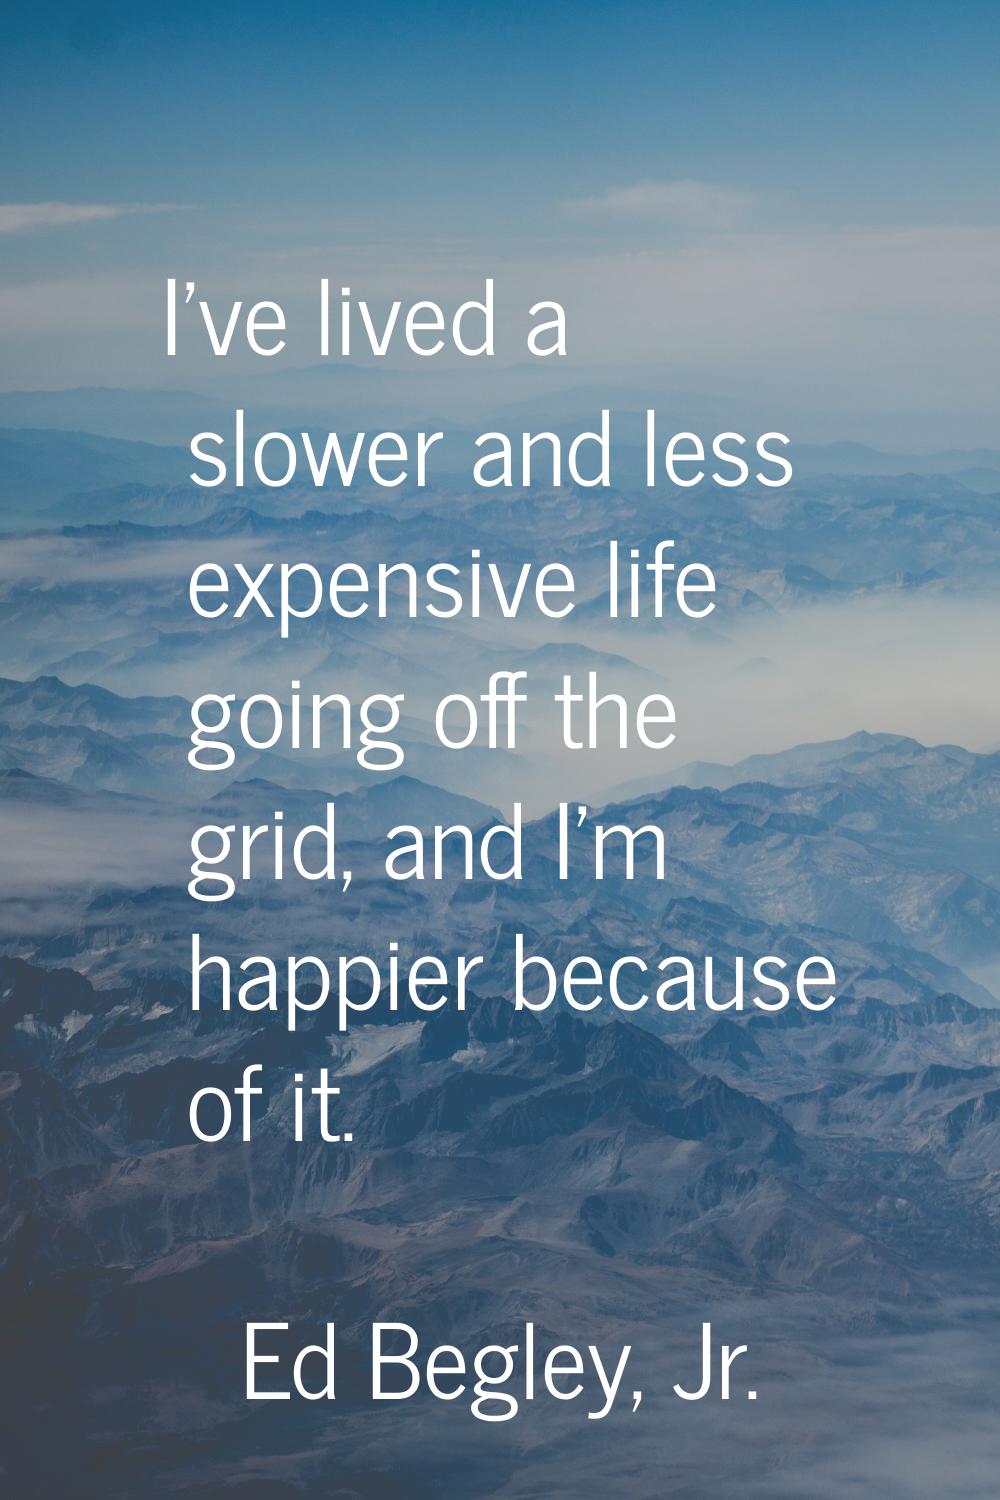 I've lived a slower and less expensive life going off the grid, and I'm happier because of it.